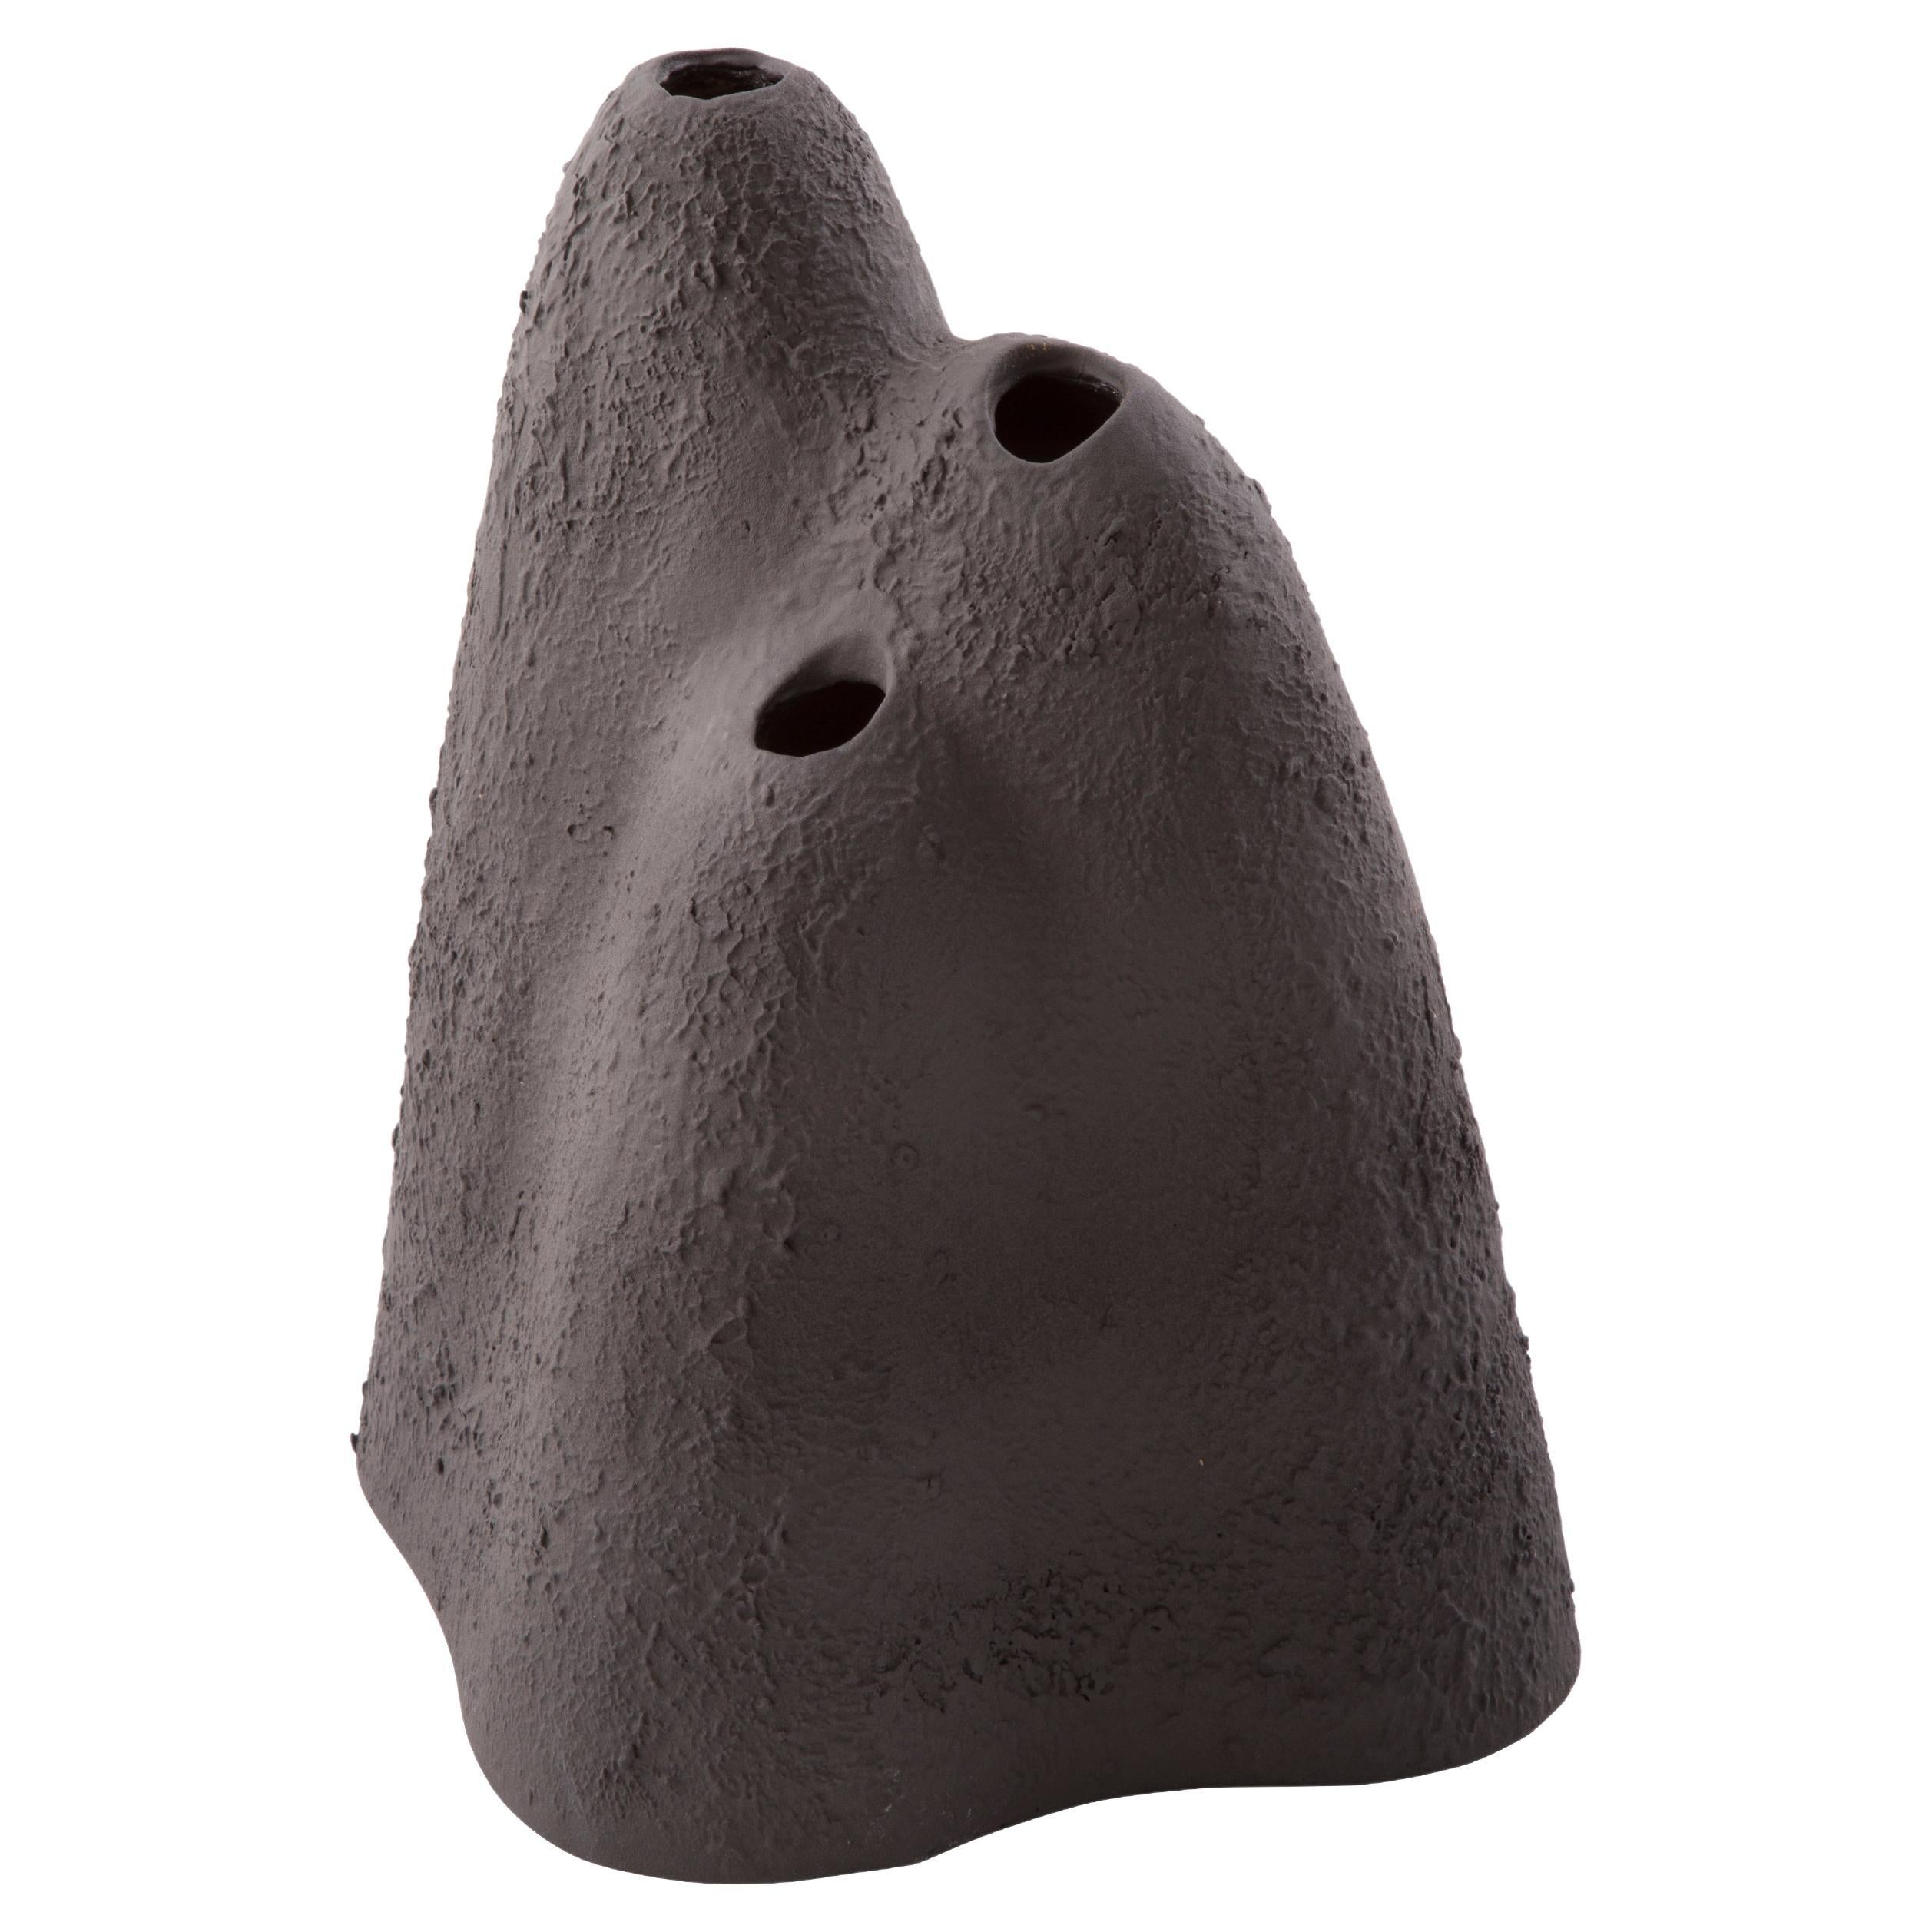 Mountain Big Umbra Vase by Pulpo For Sale